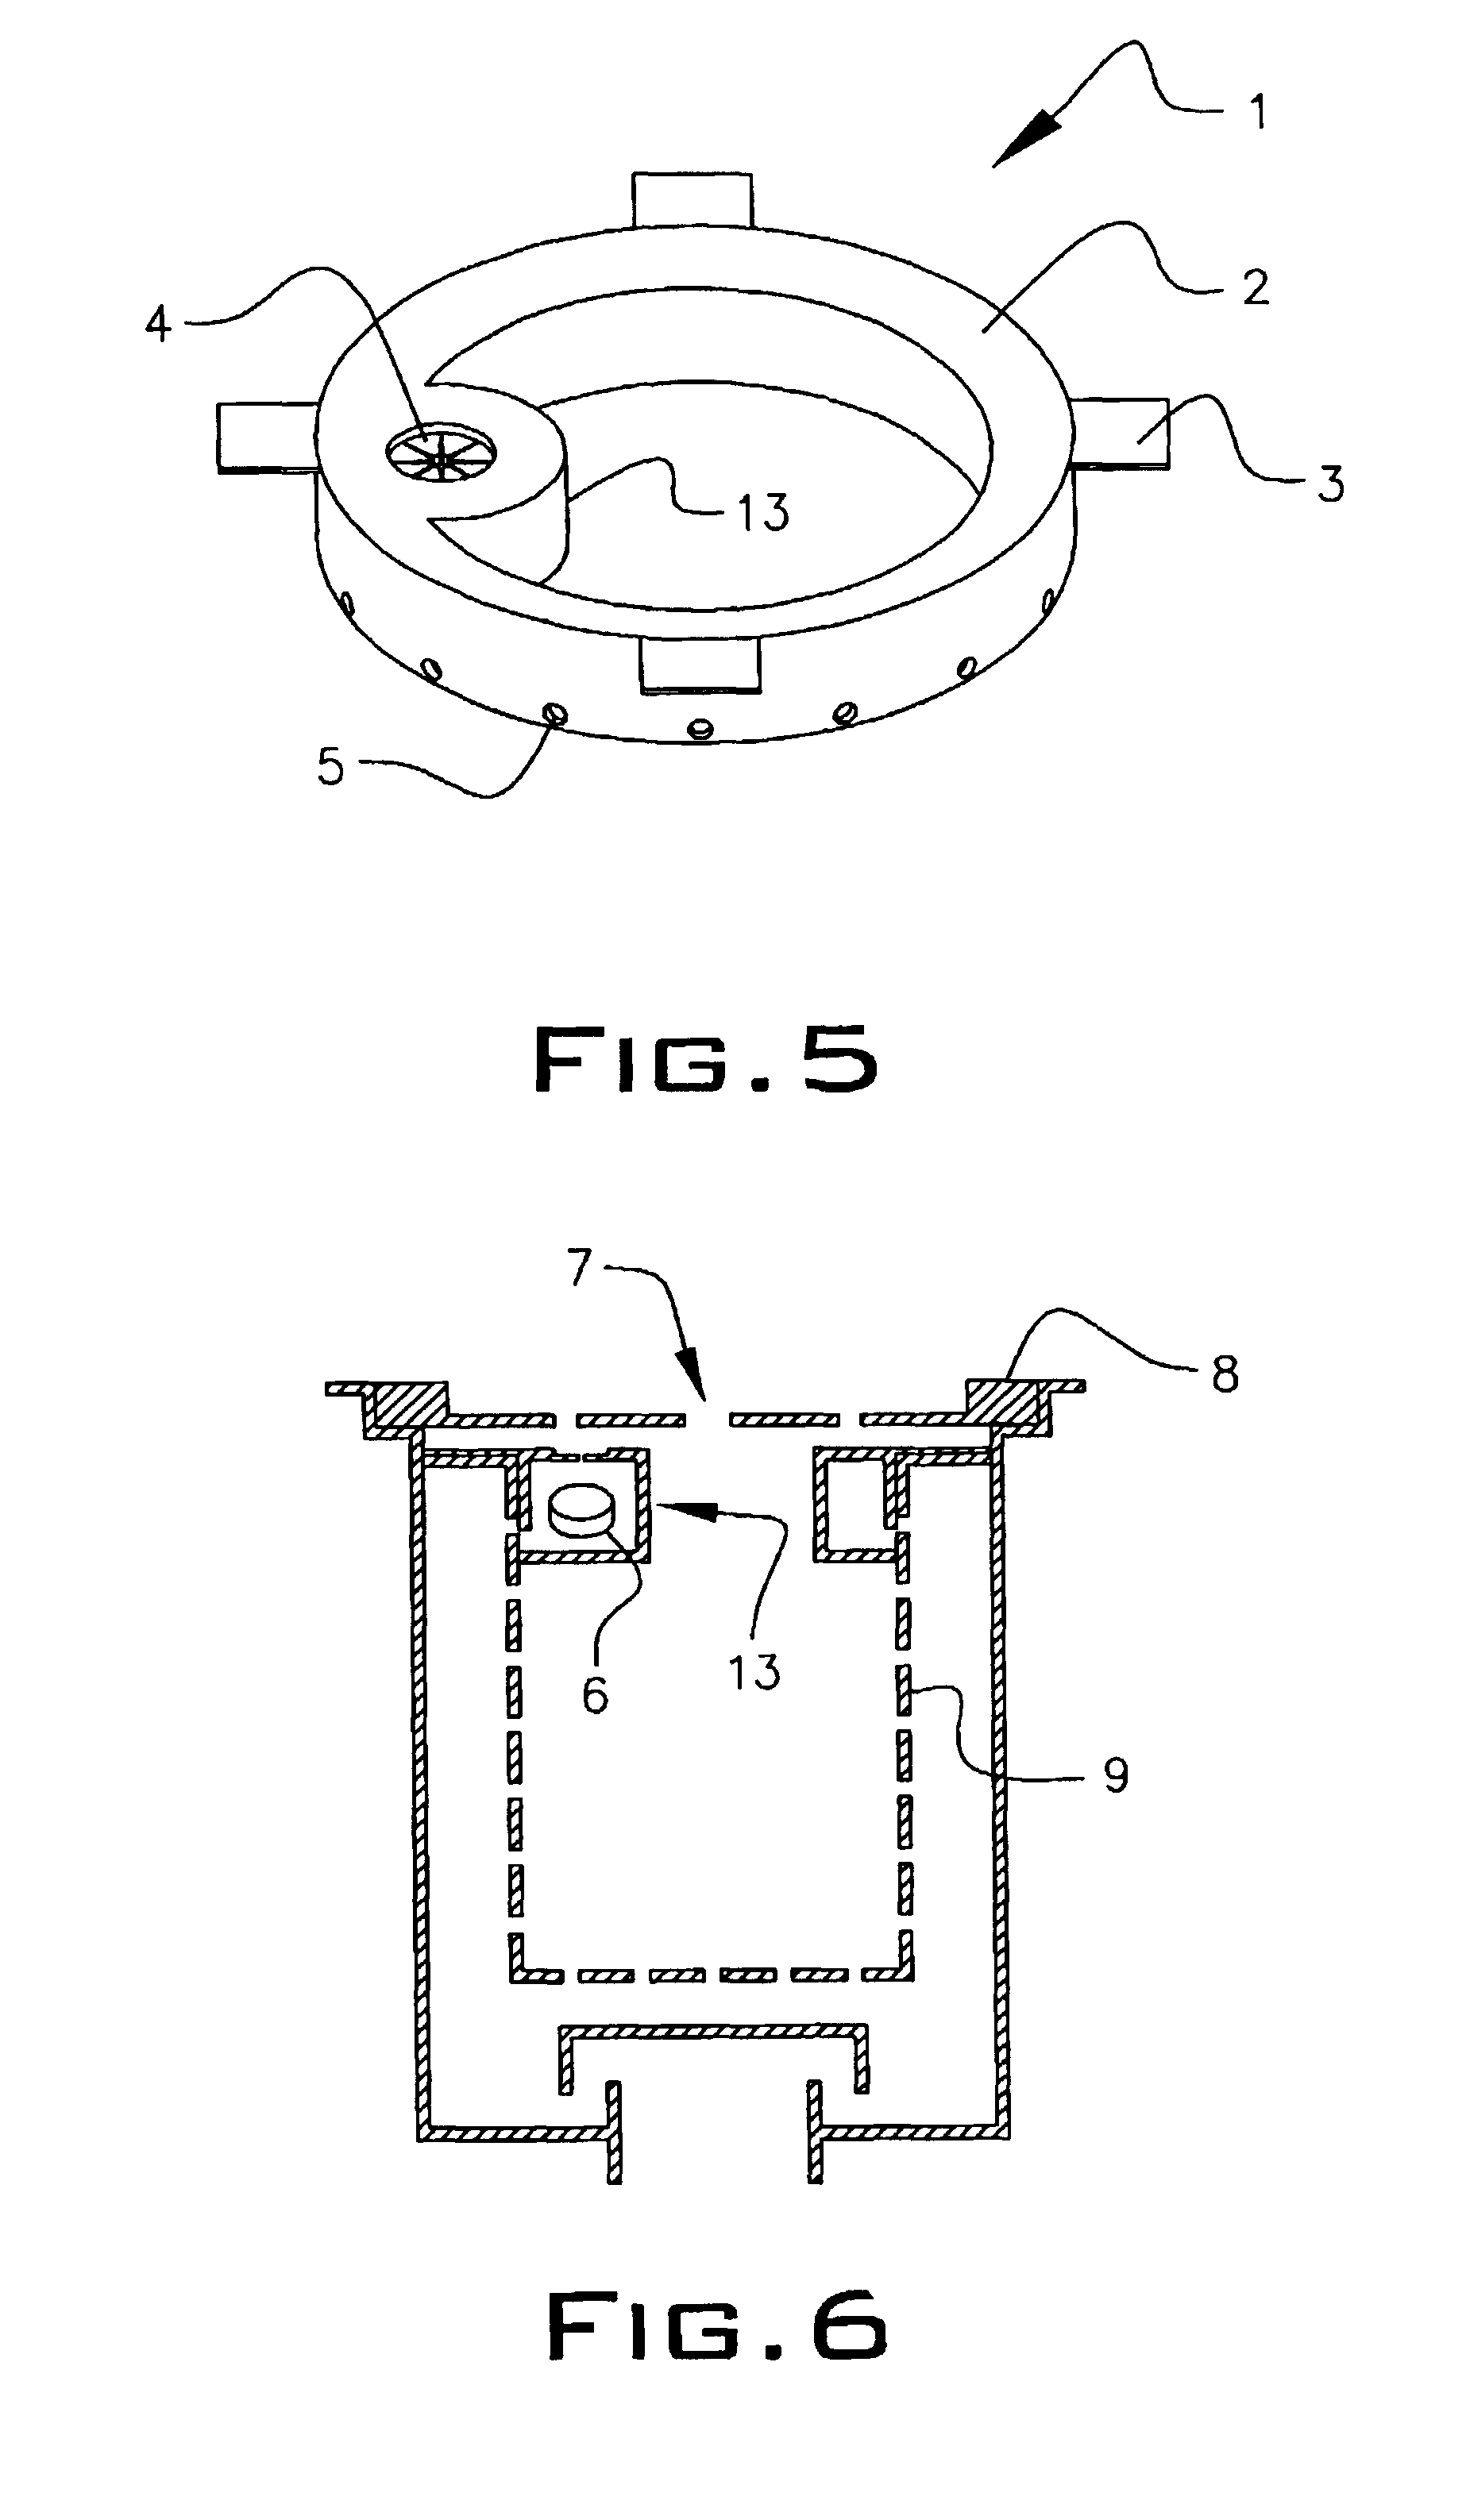 Slime remover and slime preventing/removing agent containing a clathrate compound